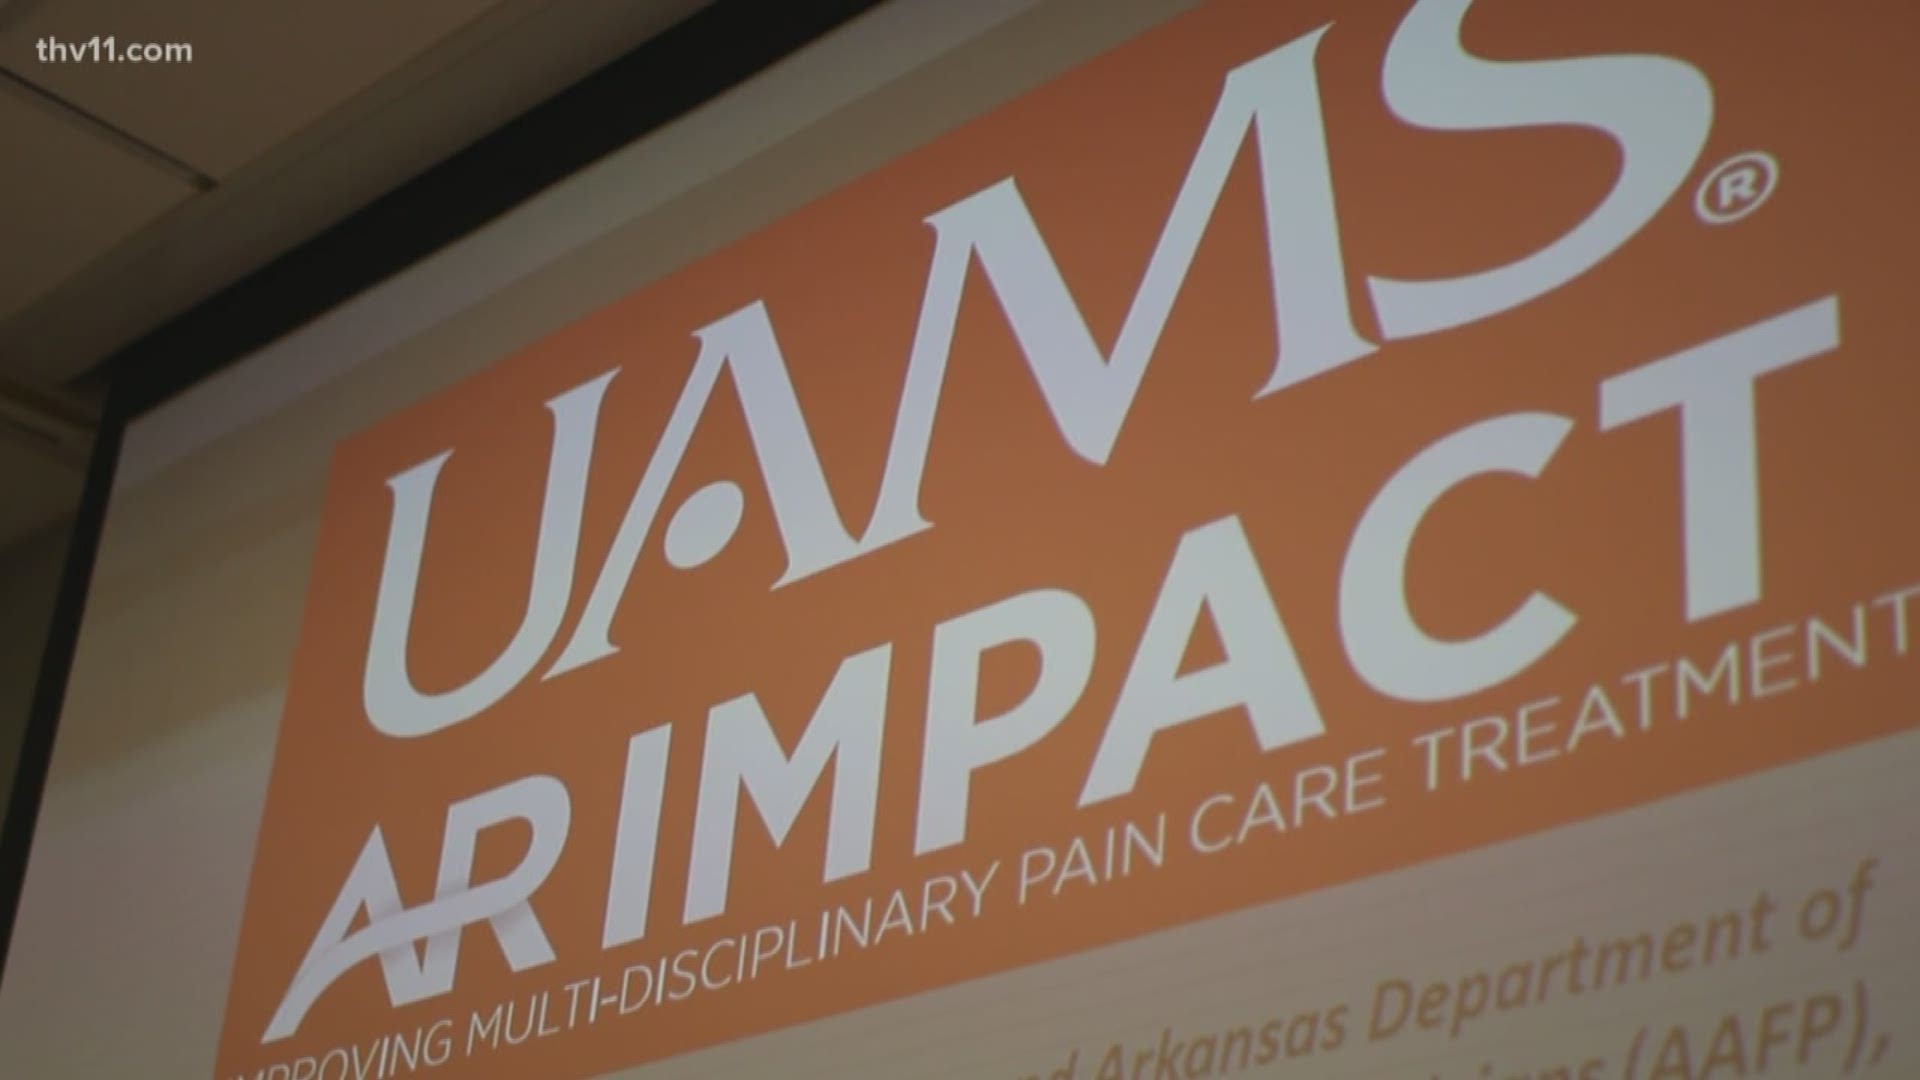 With Arkansas being one of the states hit hardest by the opioid epidemic, UAMS is offering a series of free presentations for health officials.